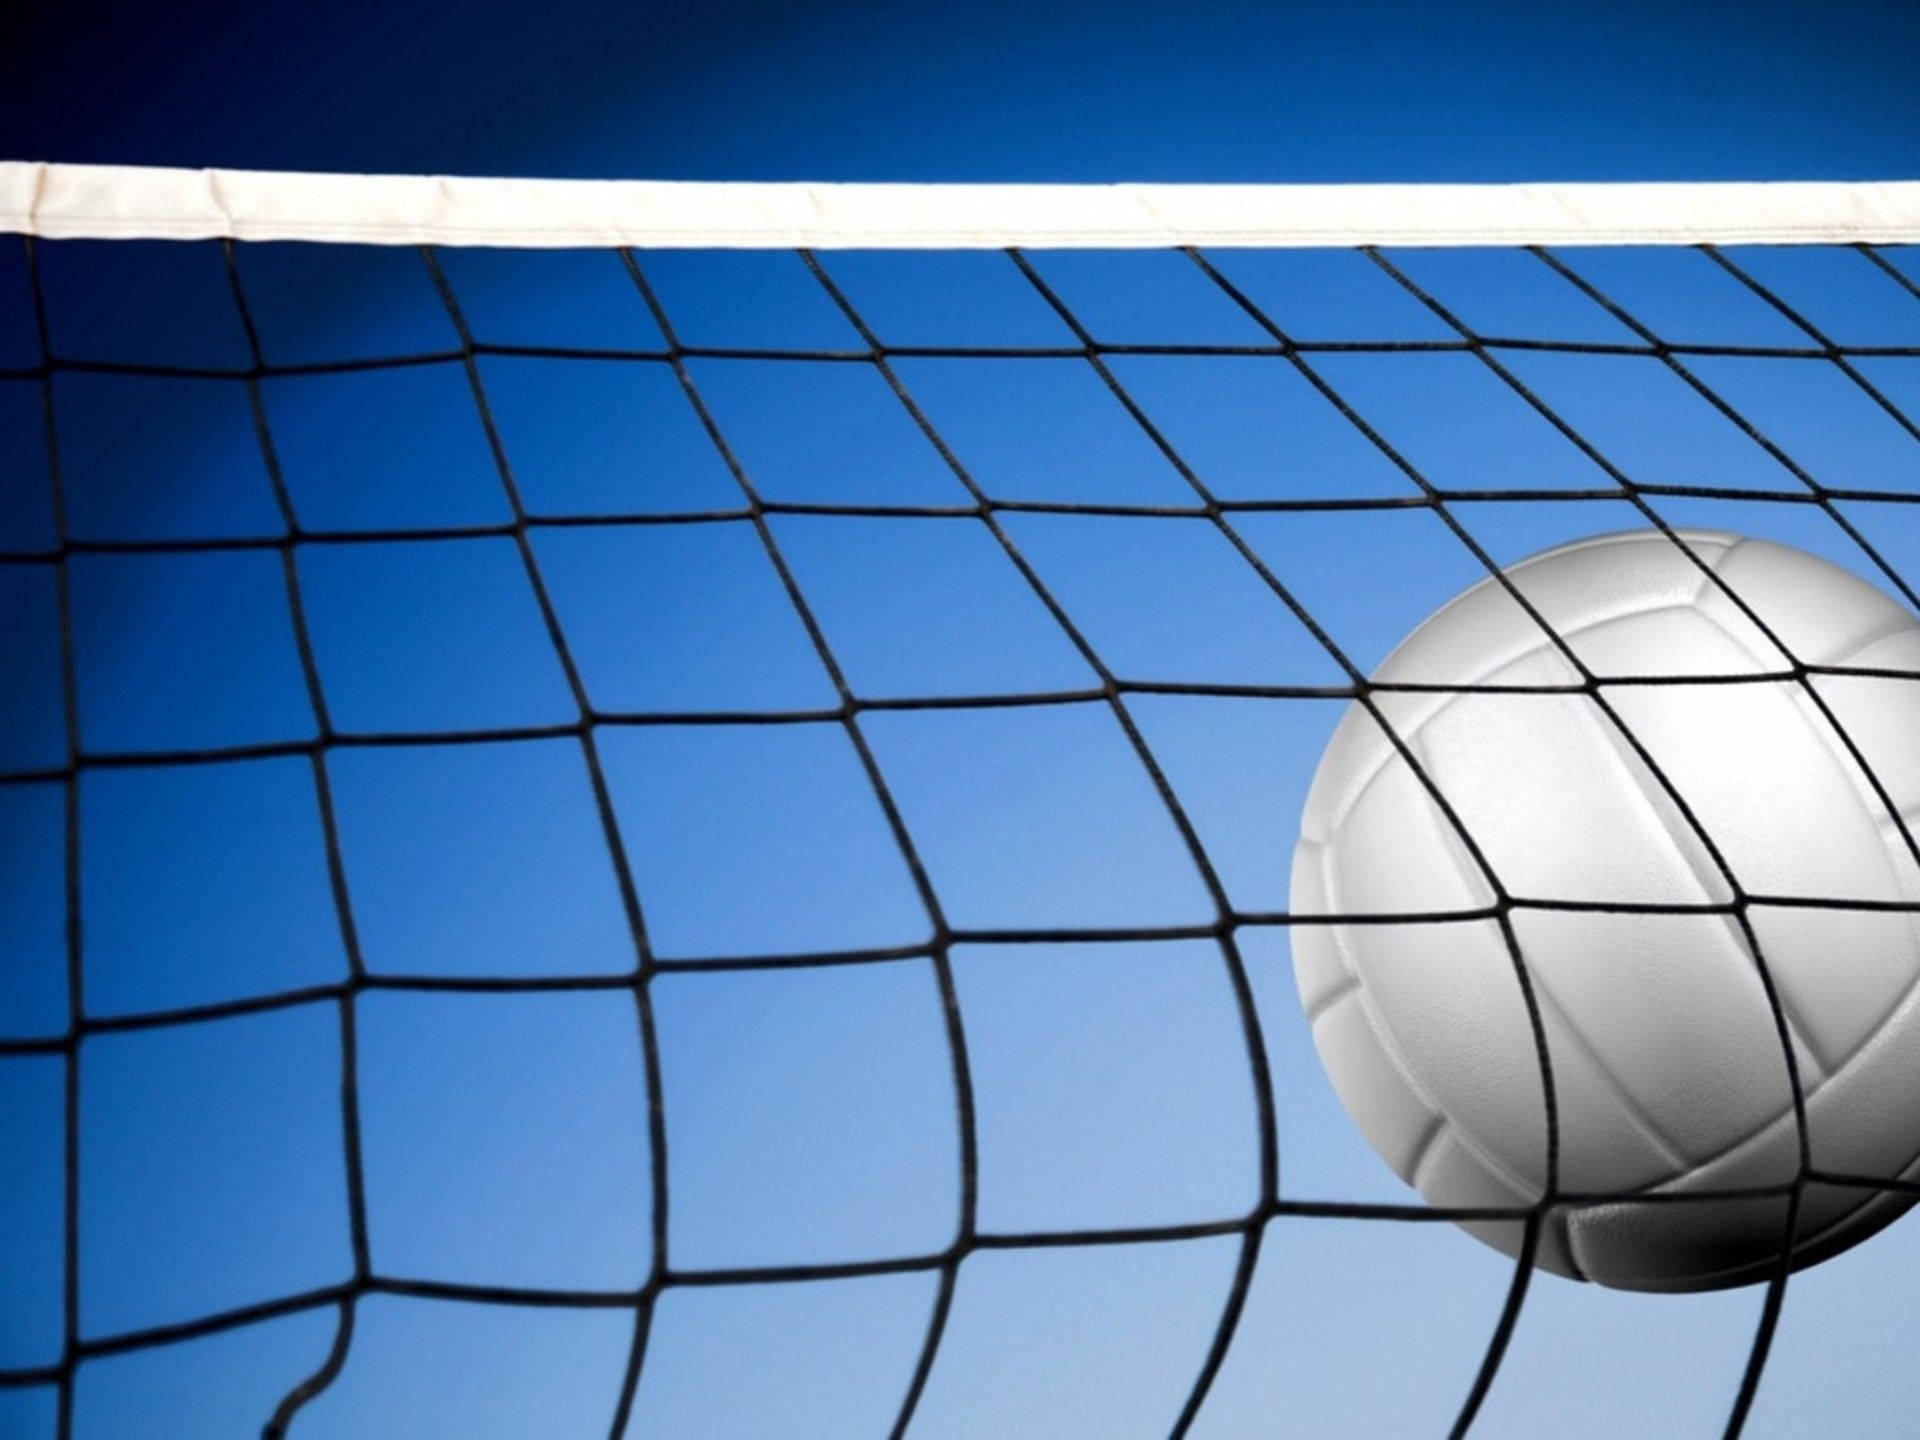 Volleyball Spiked Ball On Net Background